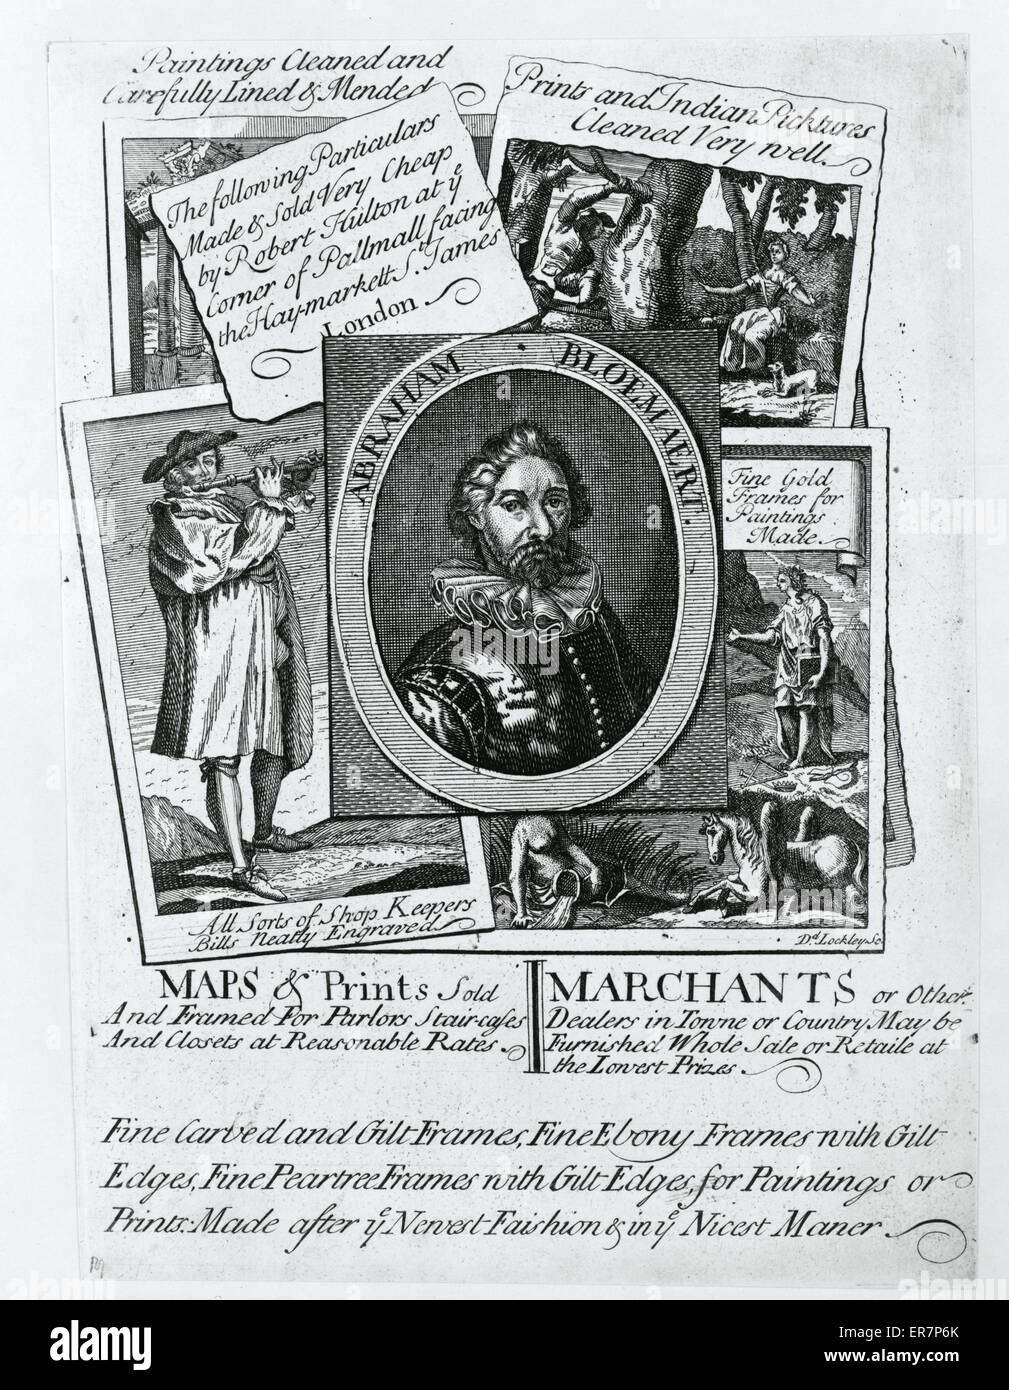 Maps and prints sold and framed Print, an advertisement for Robert Hulton's London shop, shows the types of prints sold and framed at the establishment. Includes a portrait of Dutch artist Abraham Bloemaert. Date between 1715 and 1730. Stock Photo